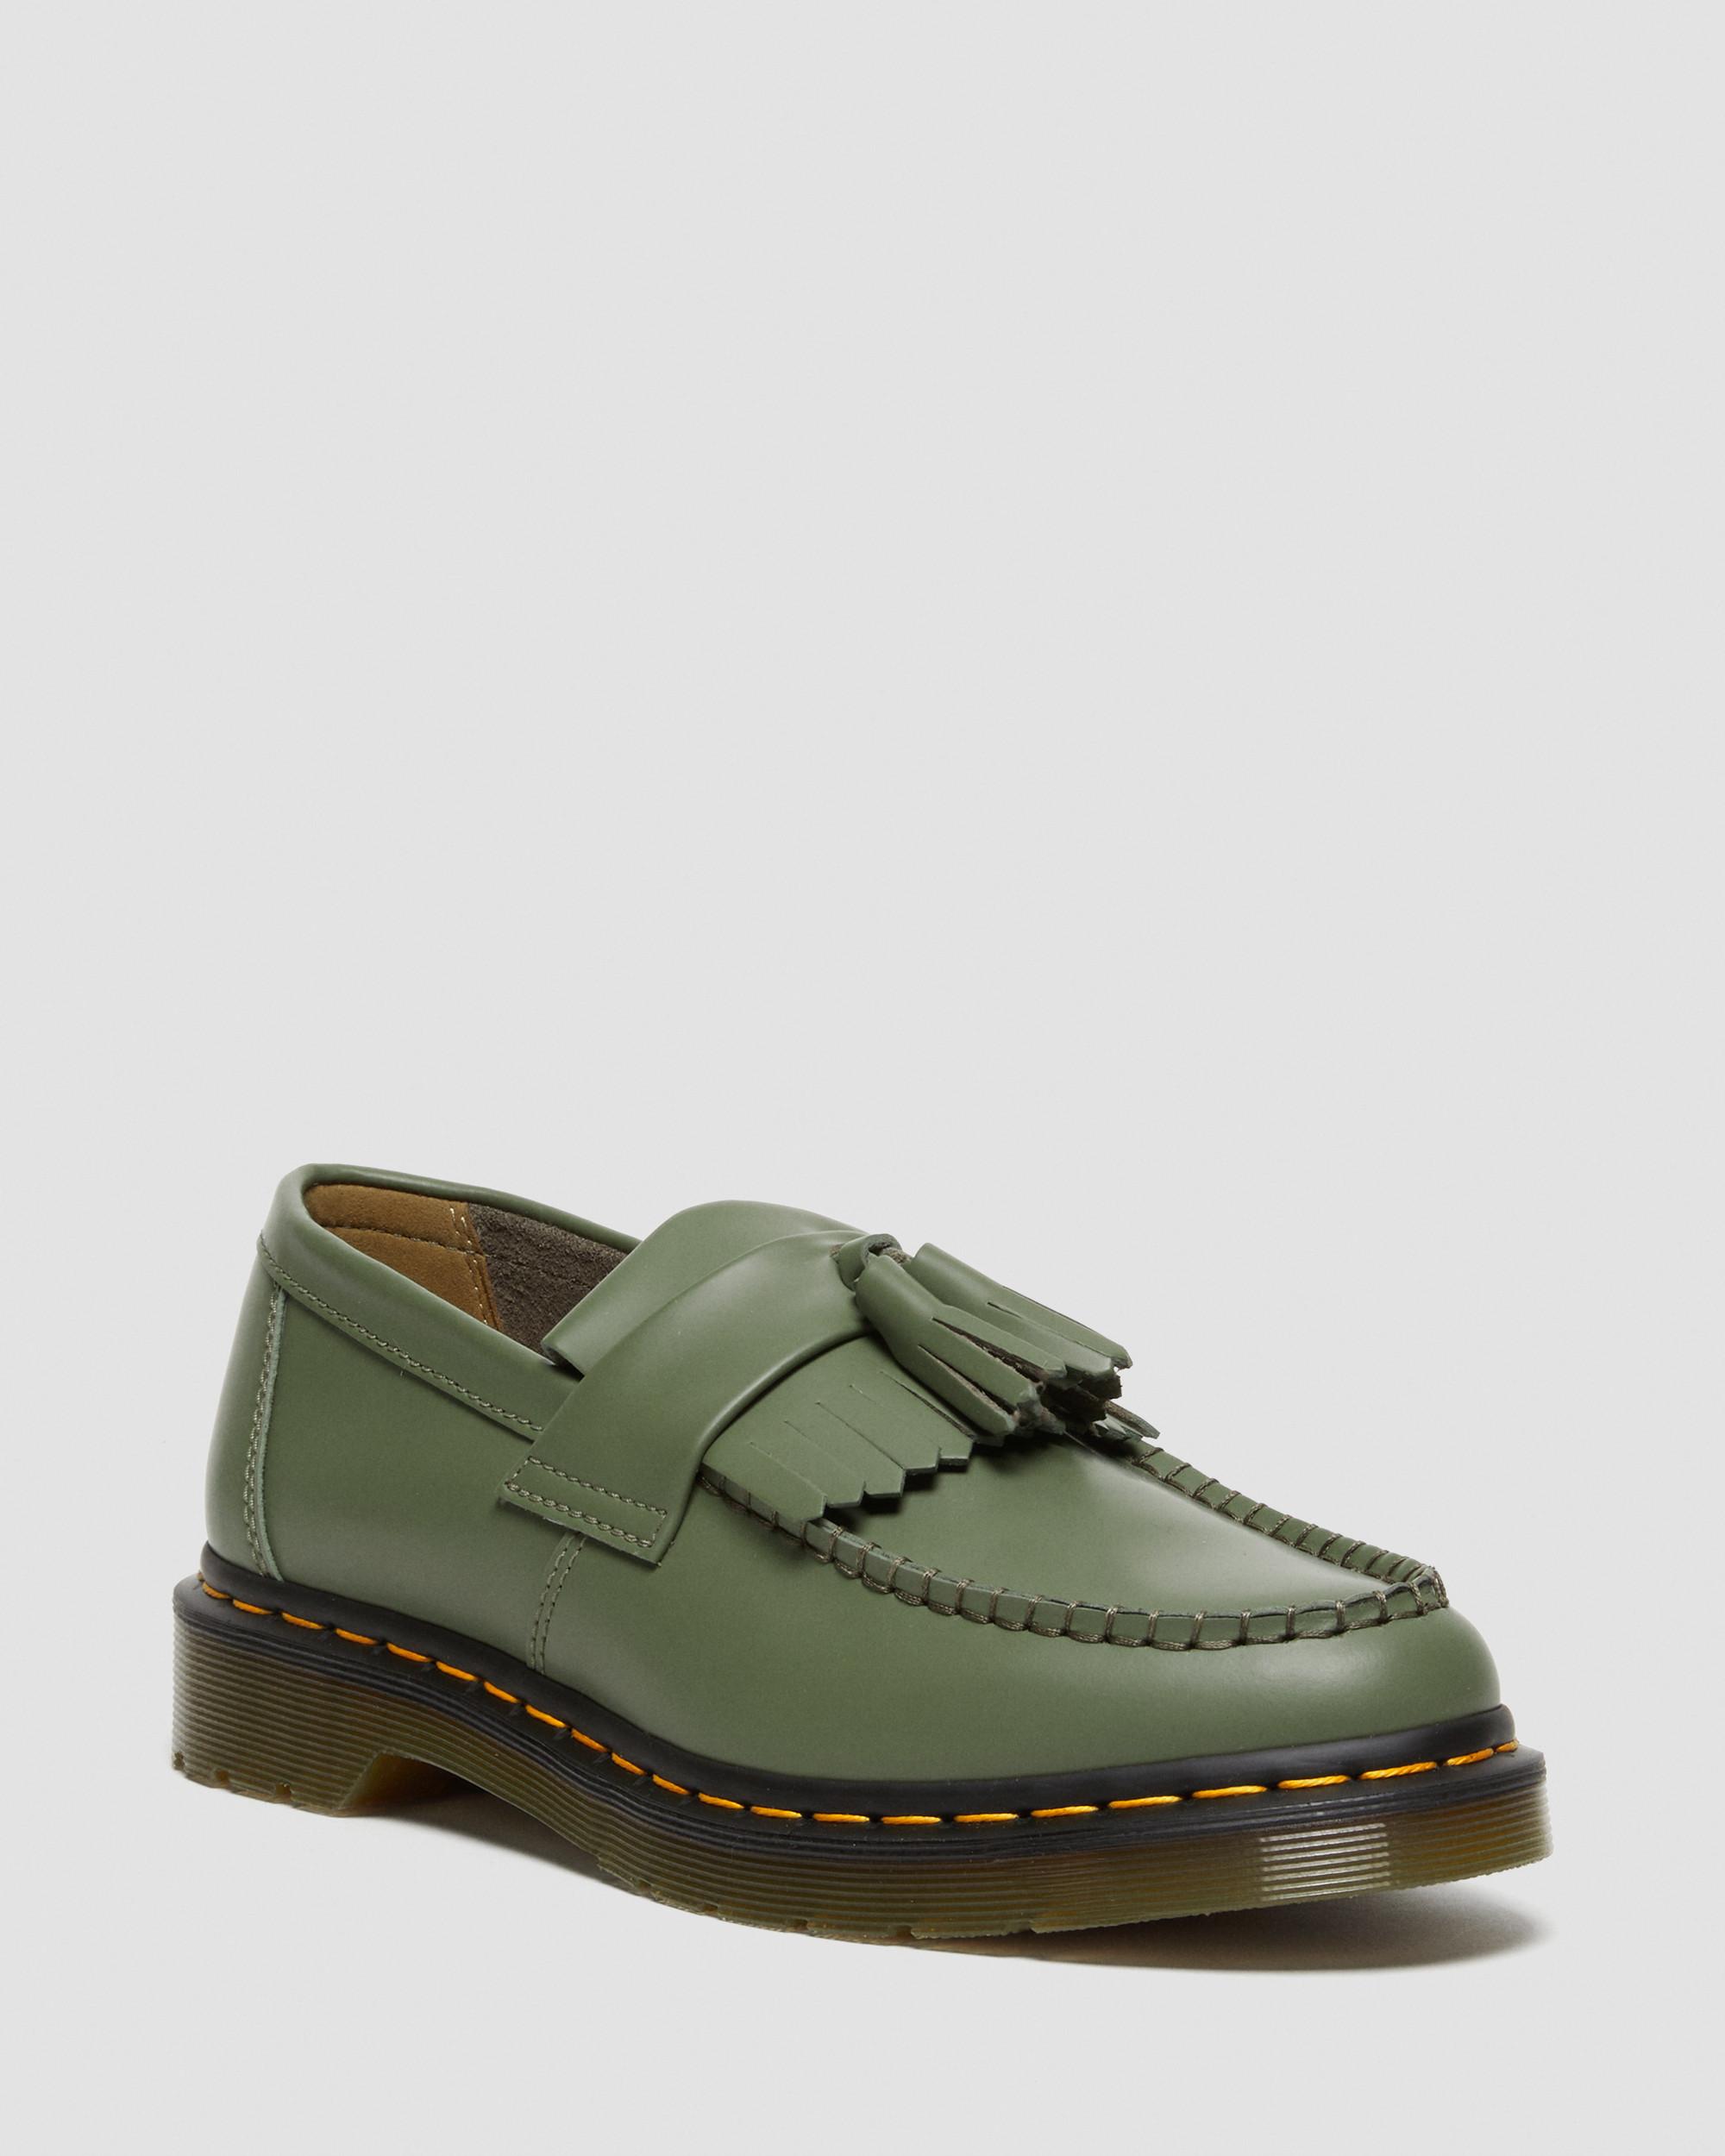 Adrian Yellow Stitch Smooth Leather Tassle Loafers